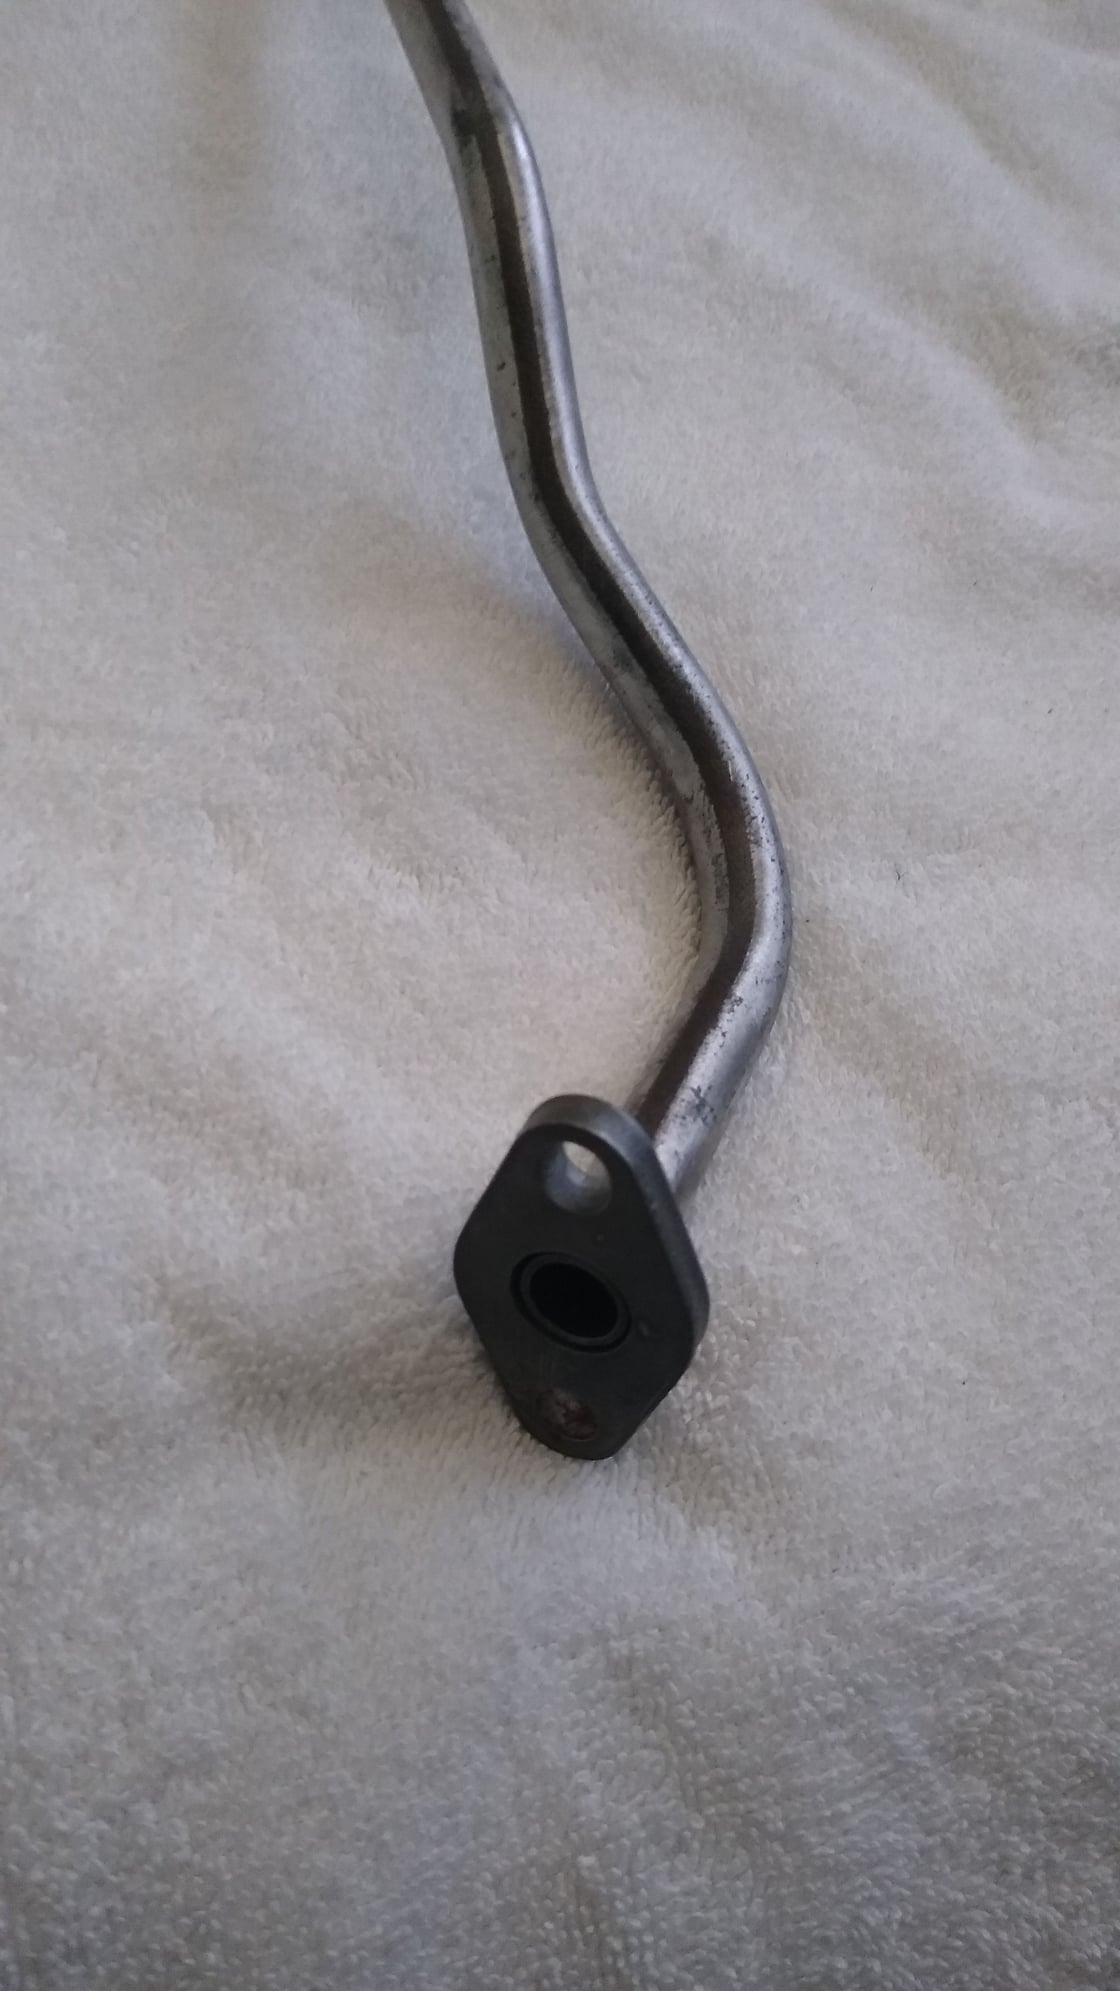 Engine - Exhaust - FD - OEM Air Tubing to Catalytic Converter - Used - 1993 to 1995 Mazda RX-7 - San Jose, CA 95121, United States